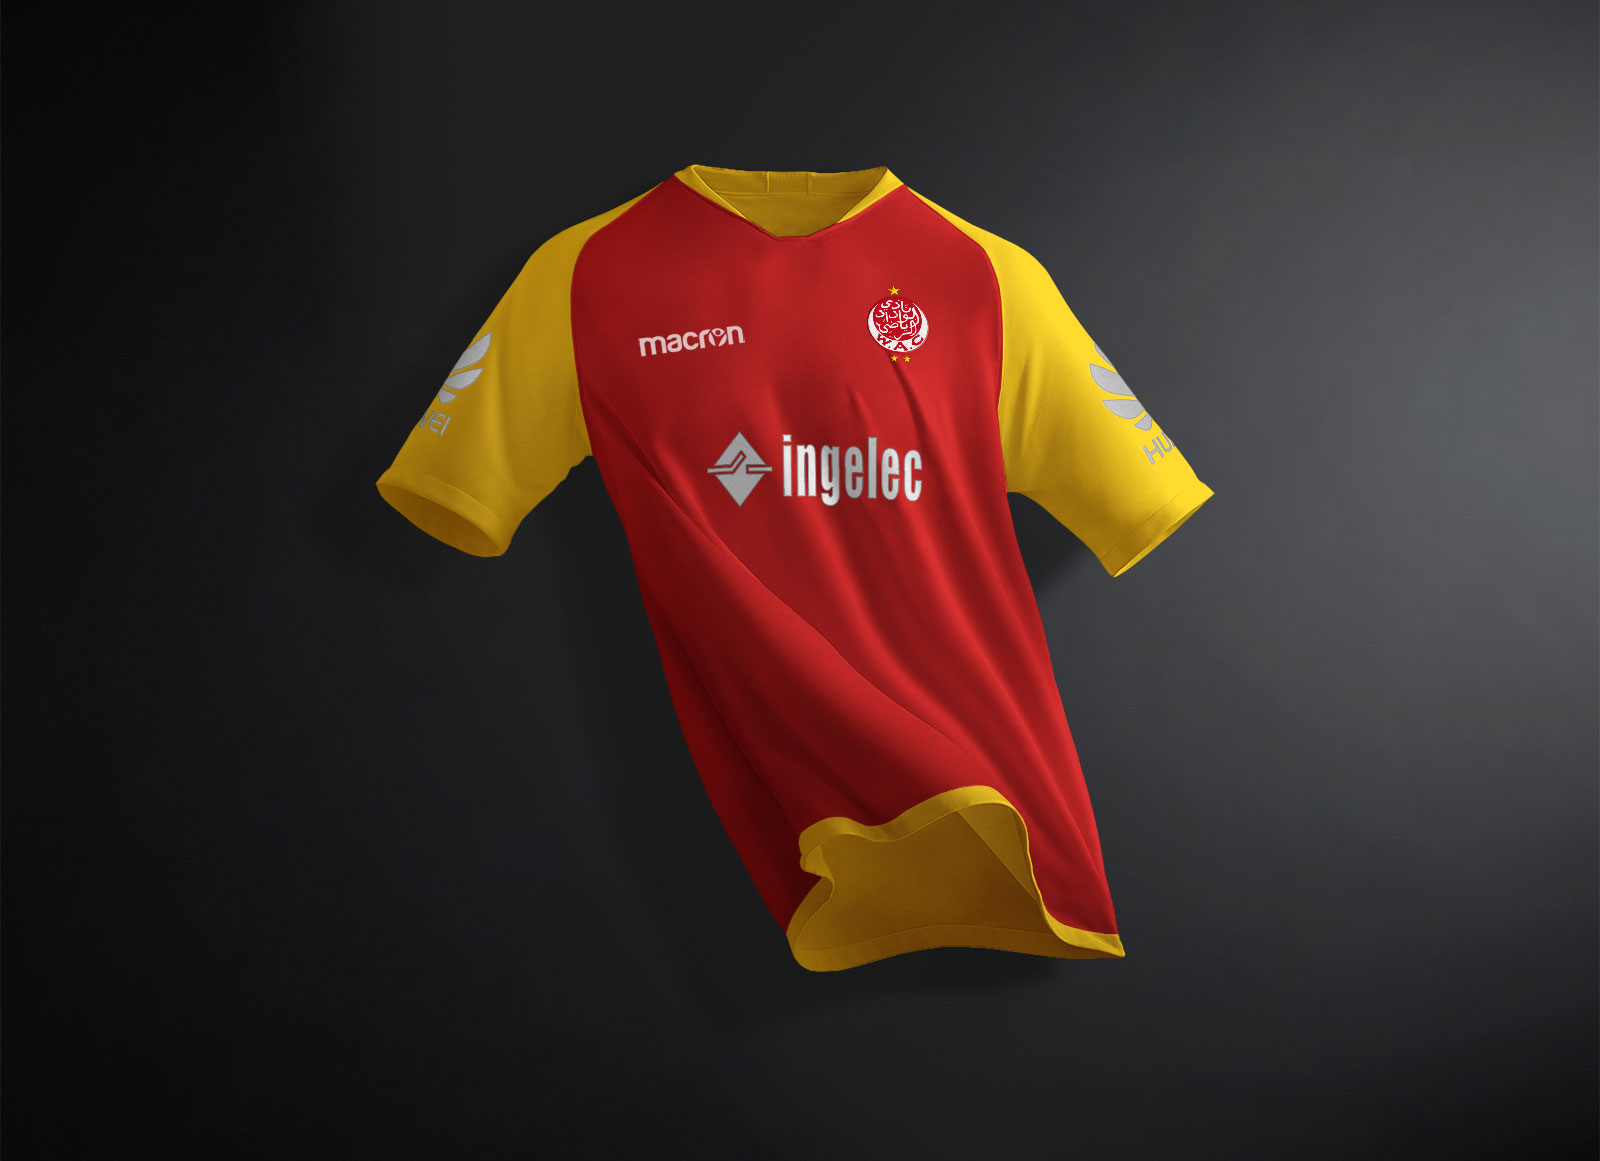 jersey mockup free download Mockups yellowimages raglan getbutton templates